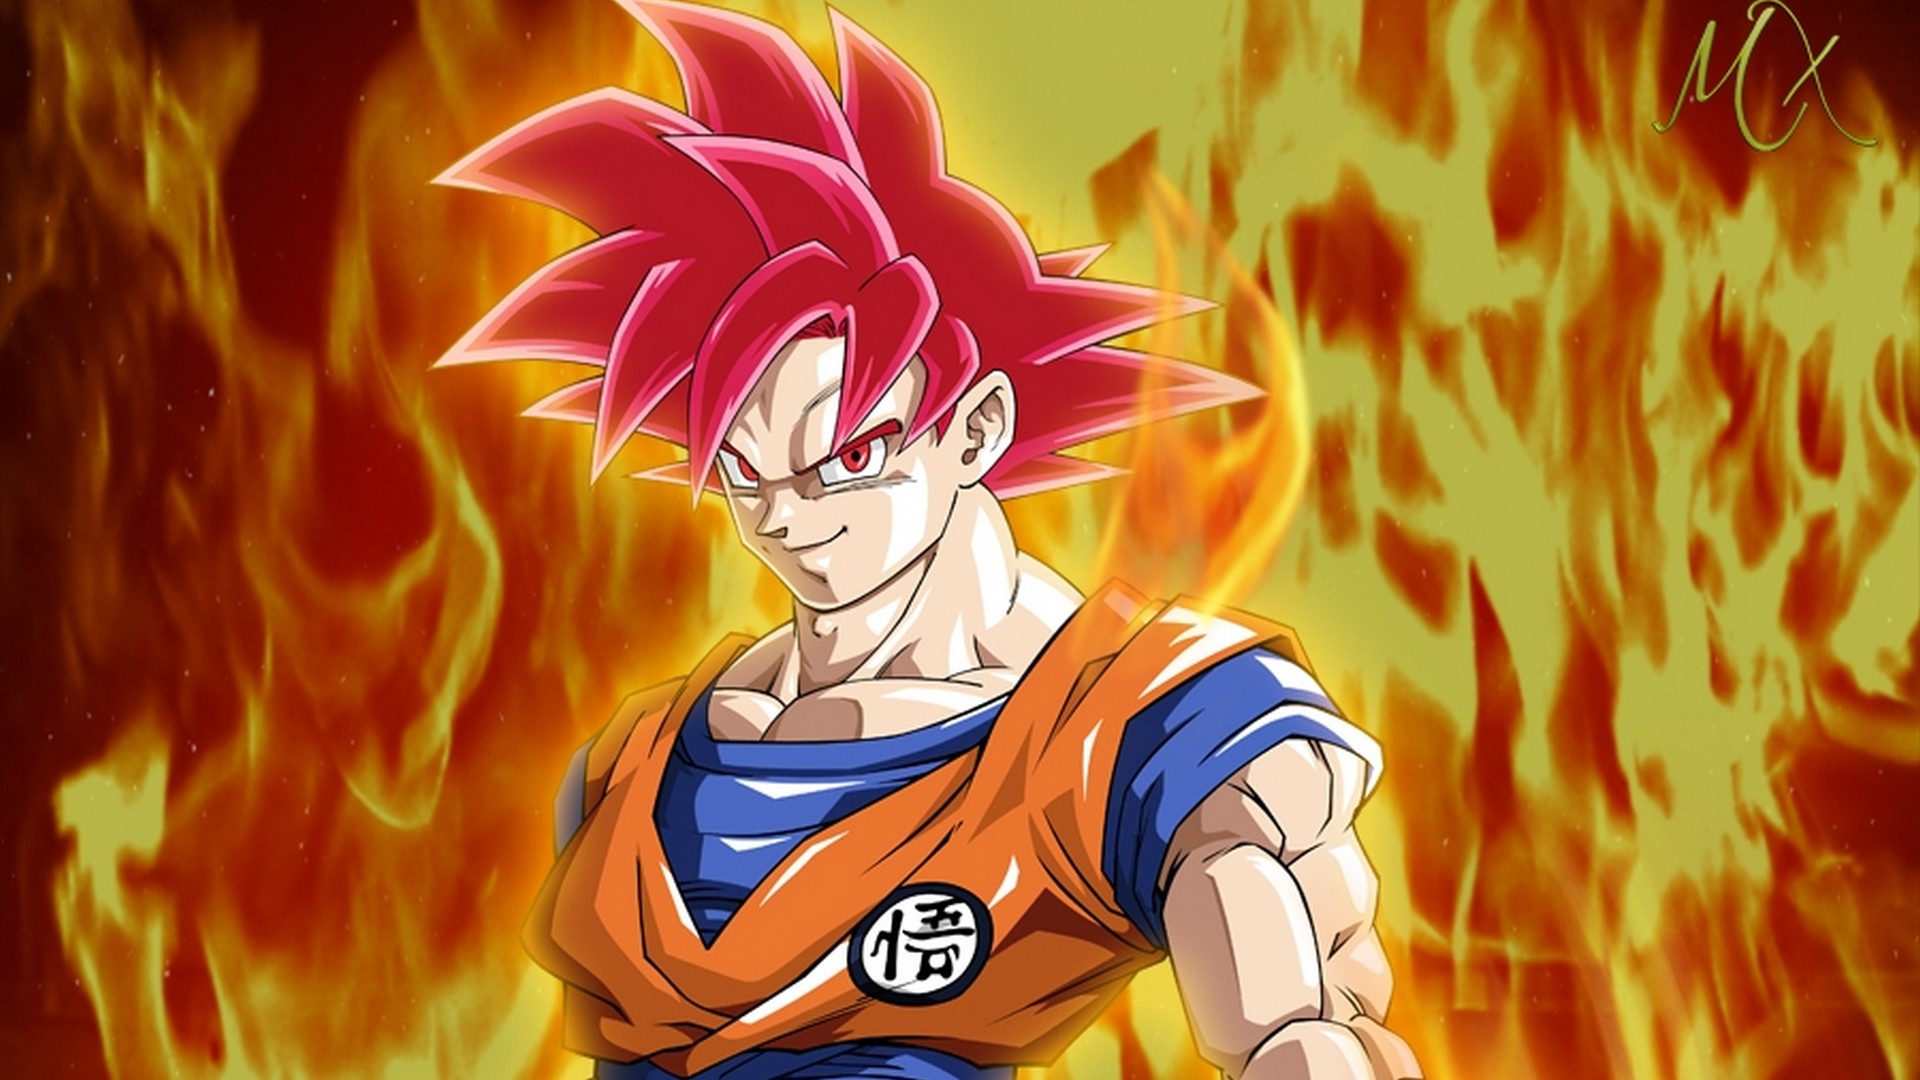 Goku Super Saiyan God Wallpaper with image resolution 1920x1080 pixel. You can use this wallpaper as background for your desktop Computer Screensavers, Android or iPhone smartphones